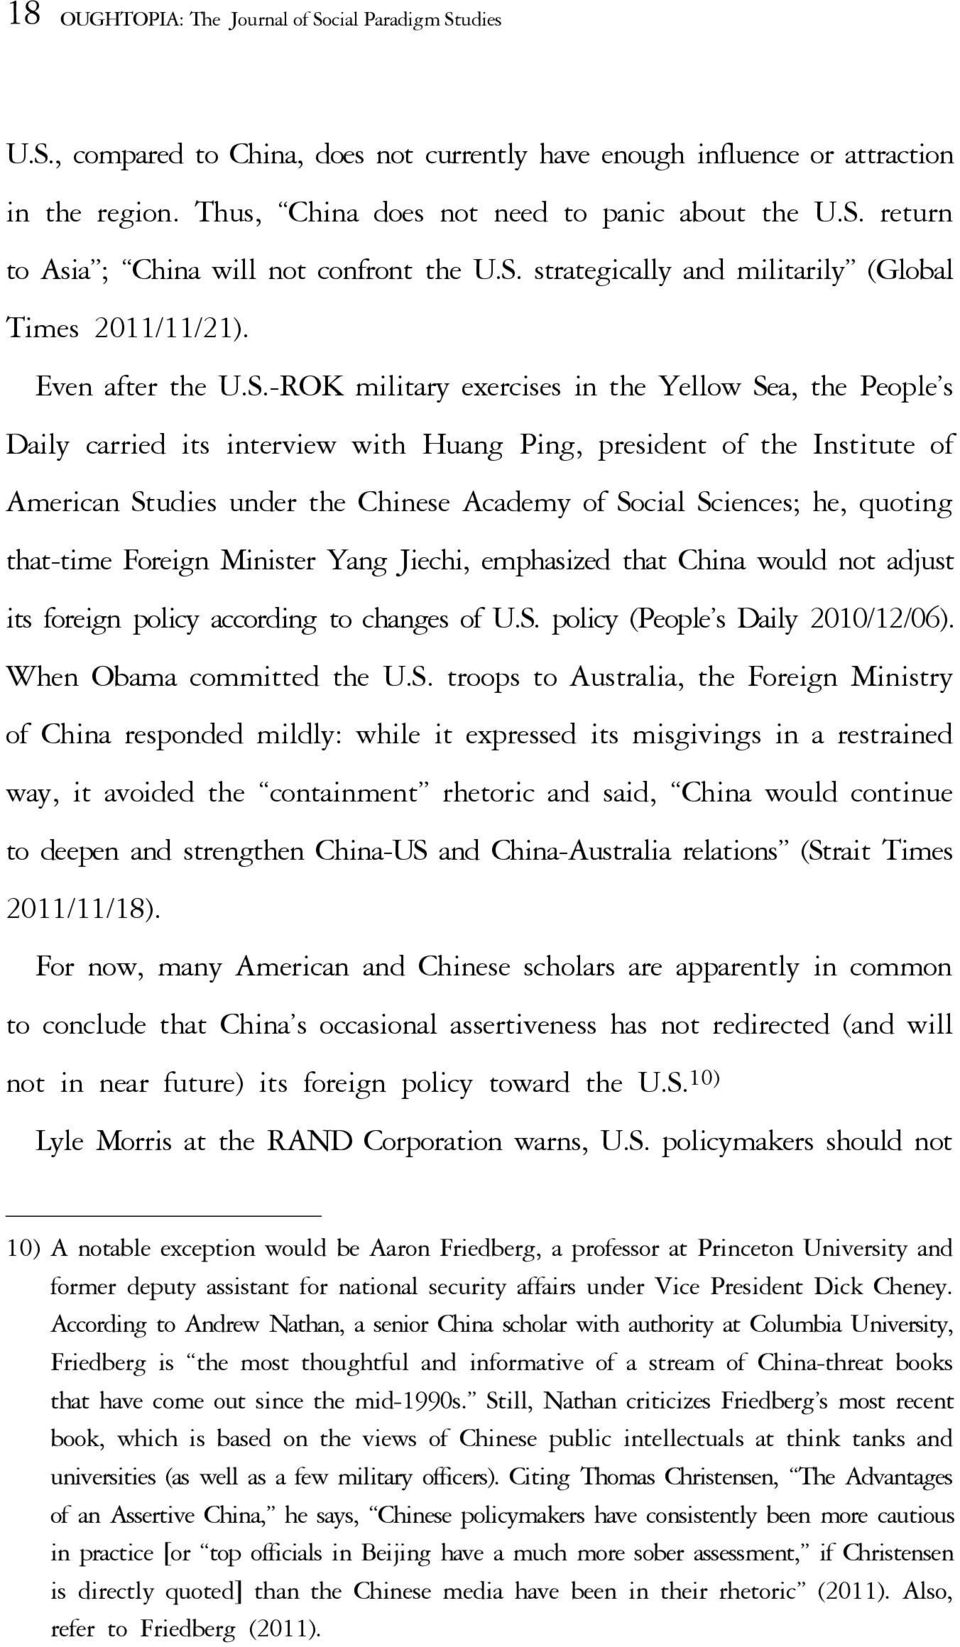 Institute of American Studies under the Chinese Academy of Social Sciences; he, quoting that-time Foreign Minister Yang Jiechi, emphasized that China would not adjust its foreign policy according to